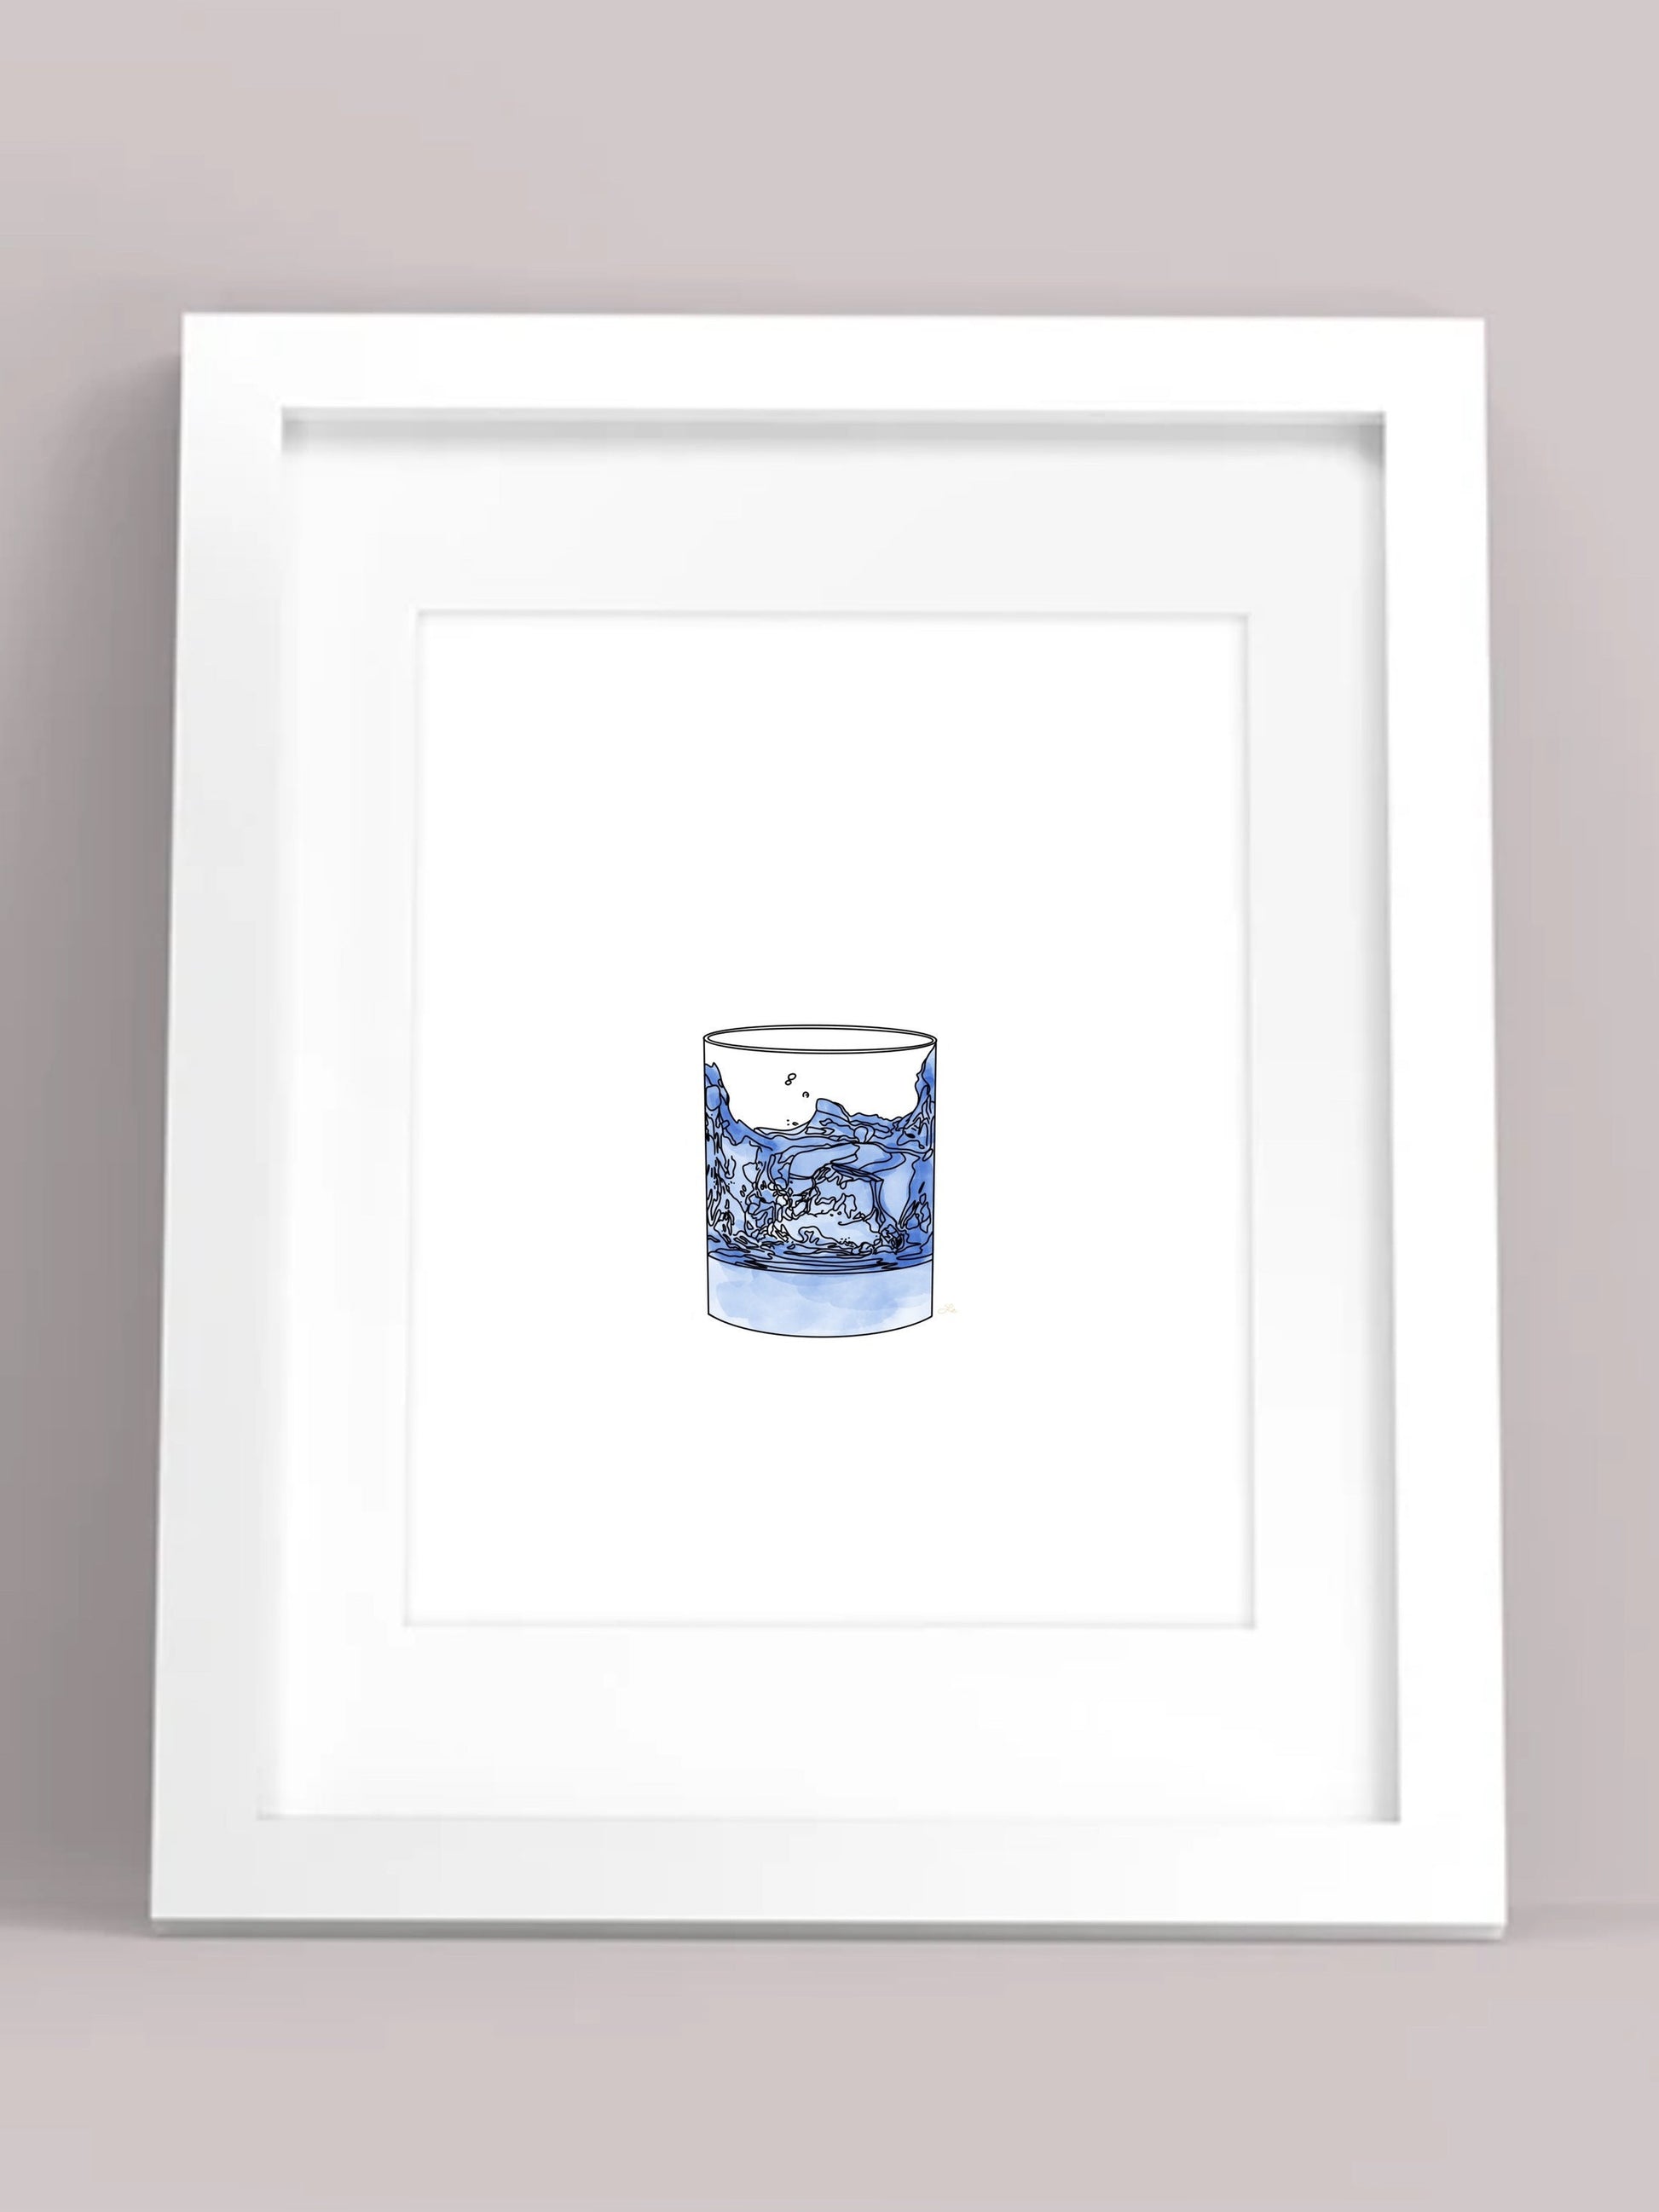 This drawing is completely hand-drawn - it has a detailed outline of the whiskey glass and the ice with a watercolor effect for the liquid in the glass.